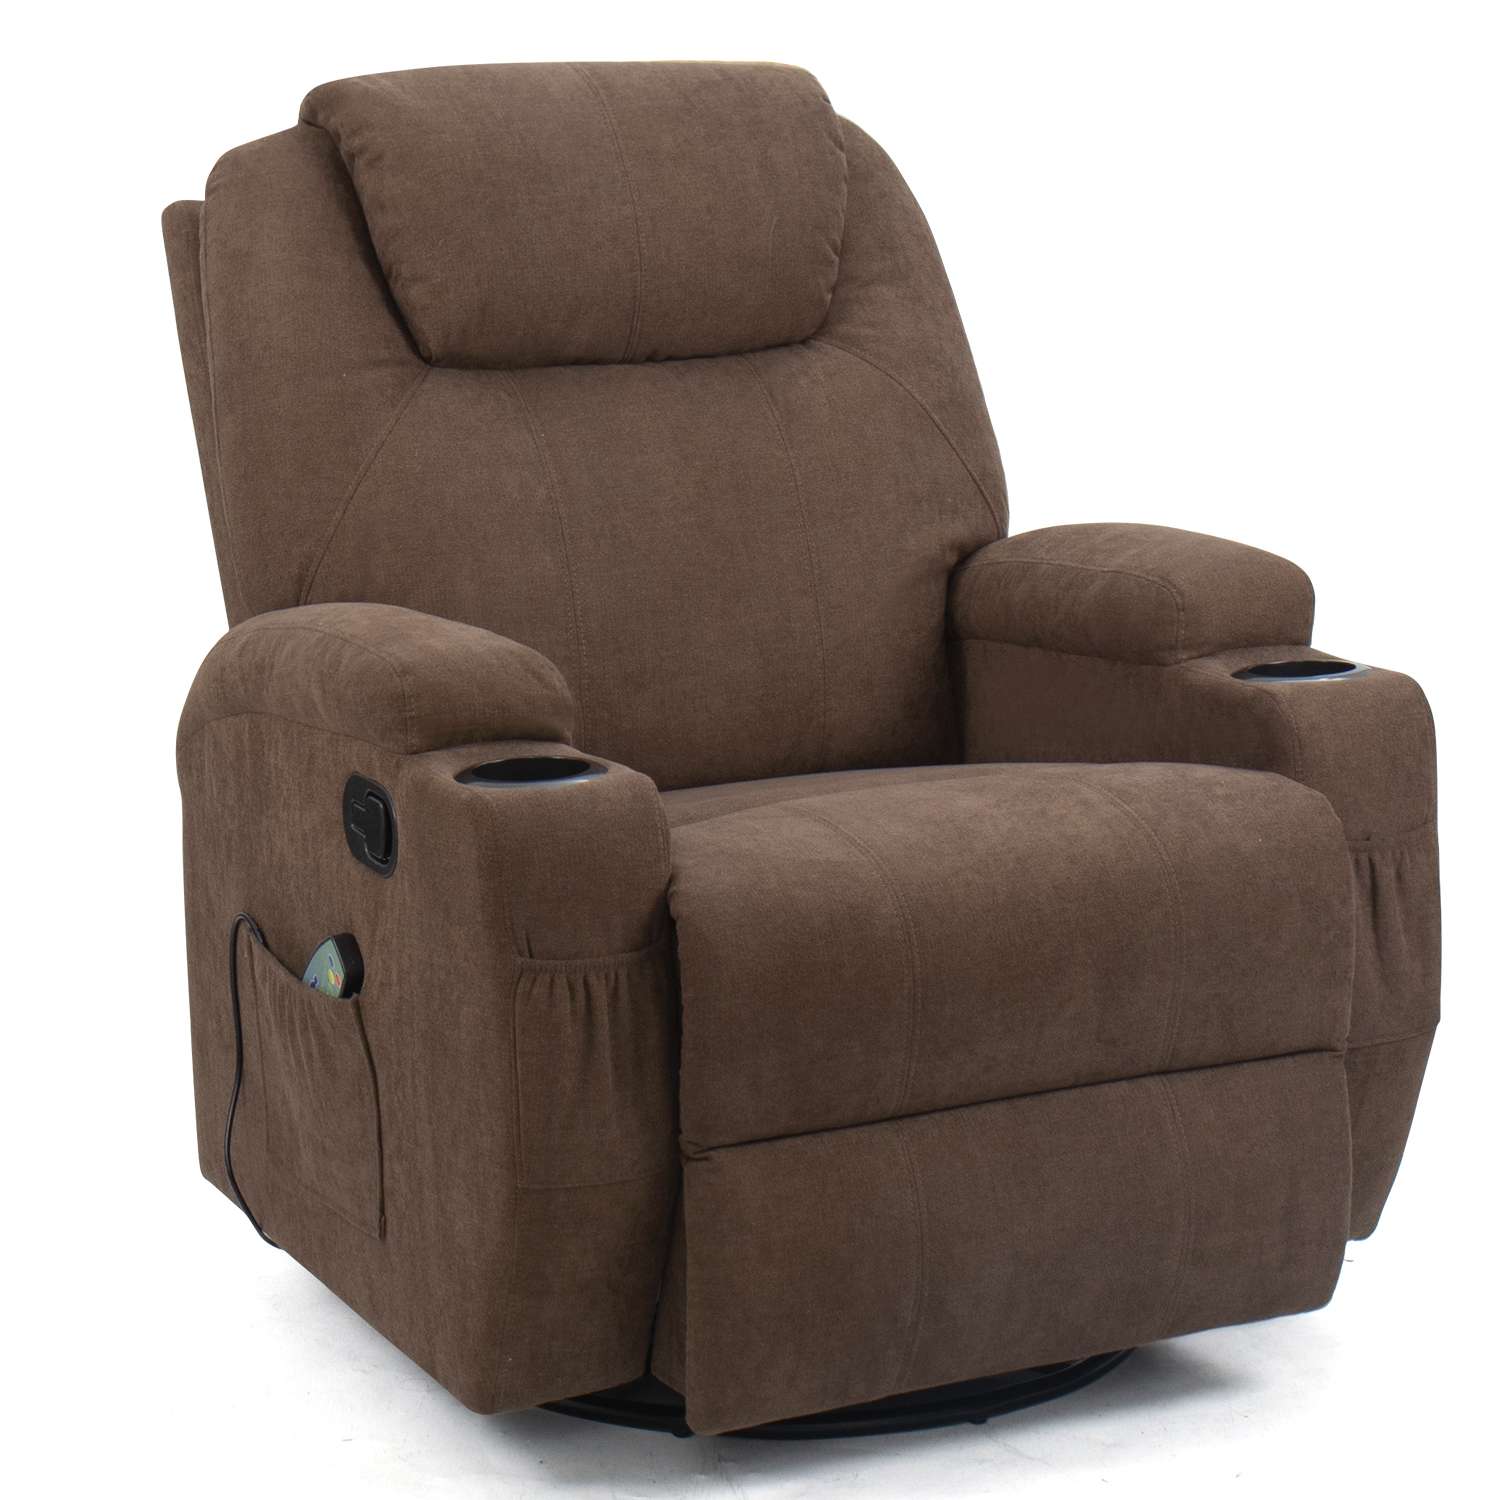 Walnew Swivel Rocker Recliner with Massage and Heat, Brown Fabric ...